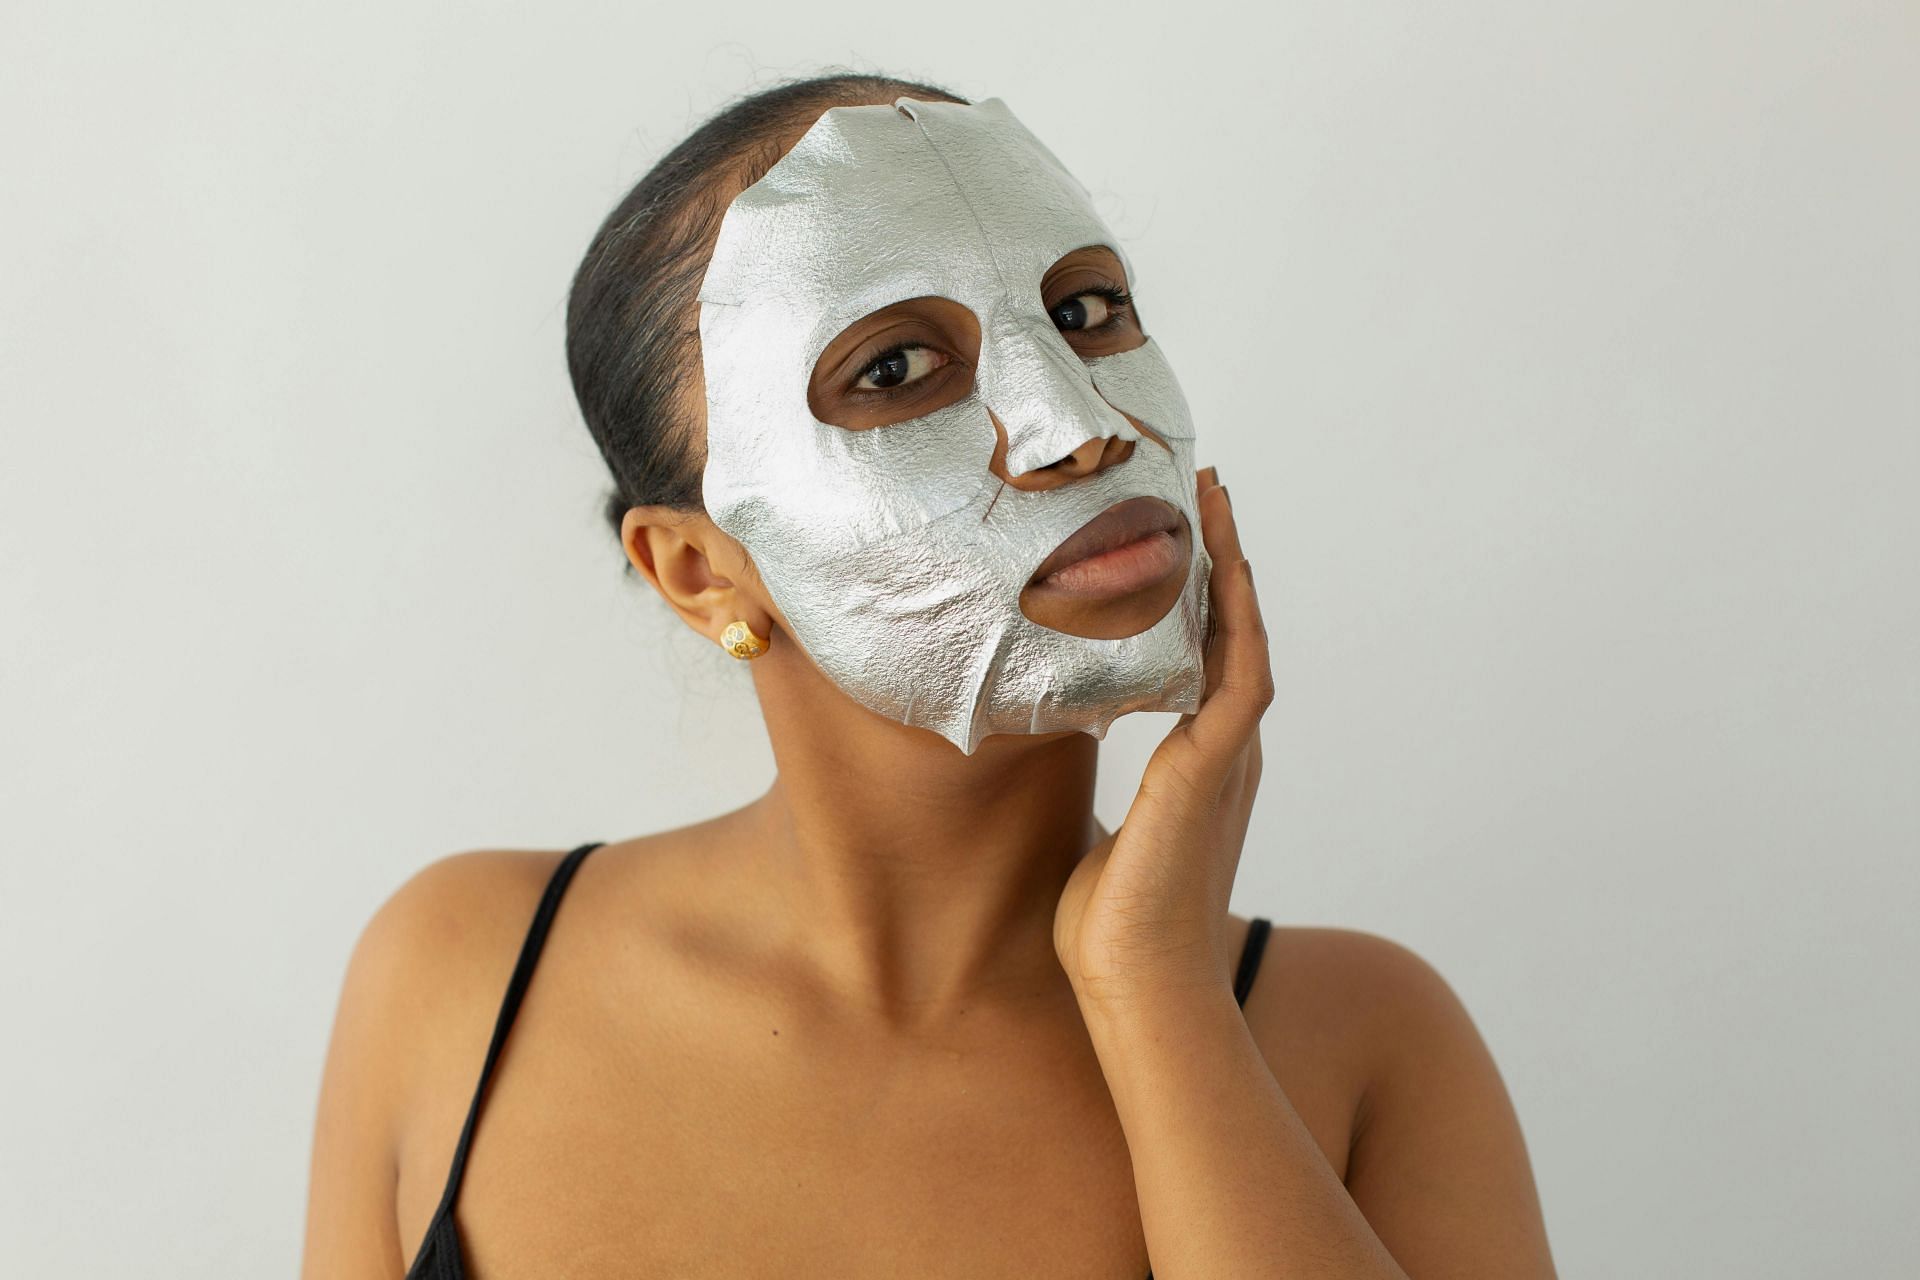 Tips to use a face mask (image sourced via Pexels / Photo by monstera)